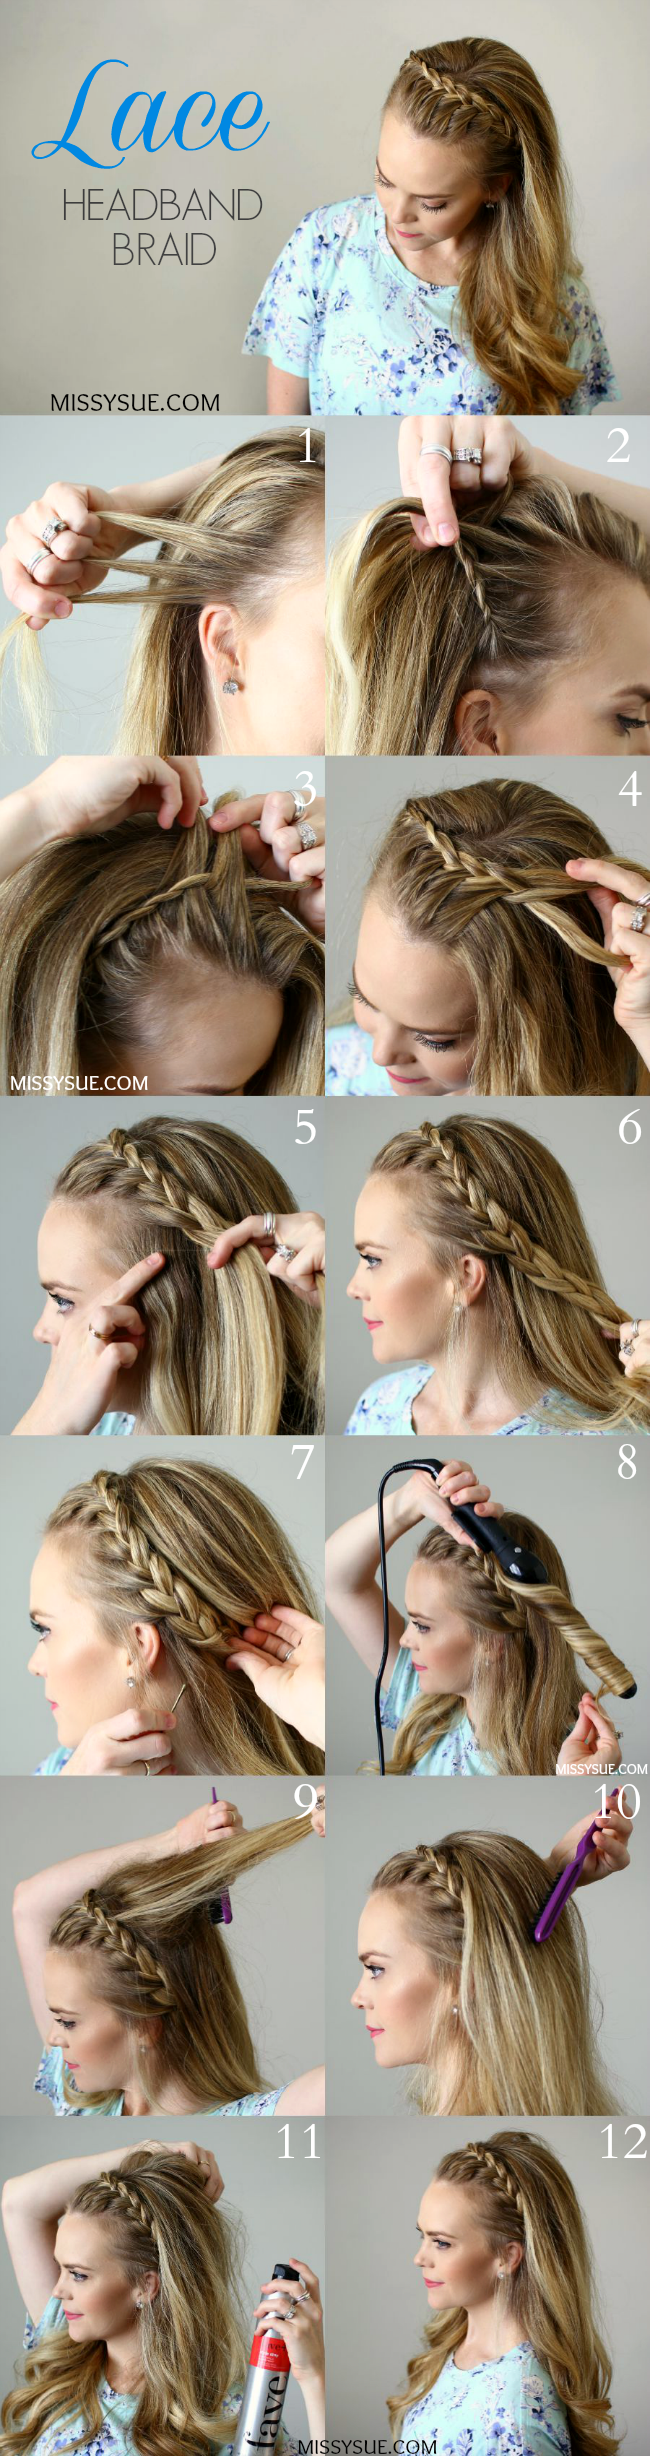 10 Of The Easiest Braided Hairstyles Anyone Can Master